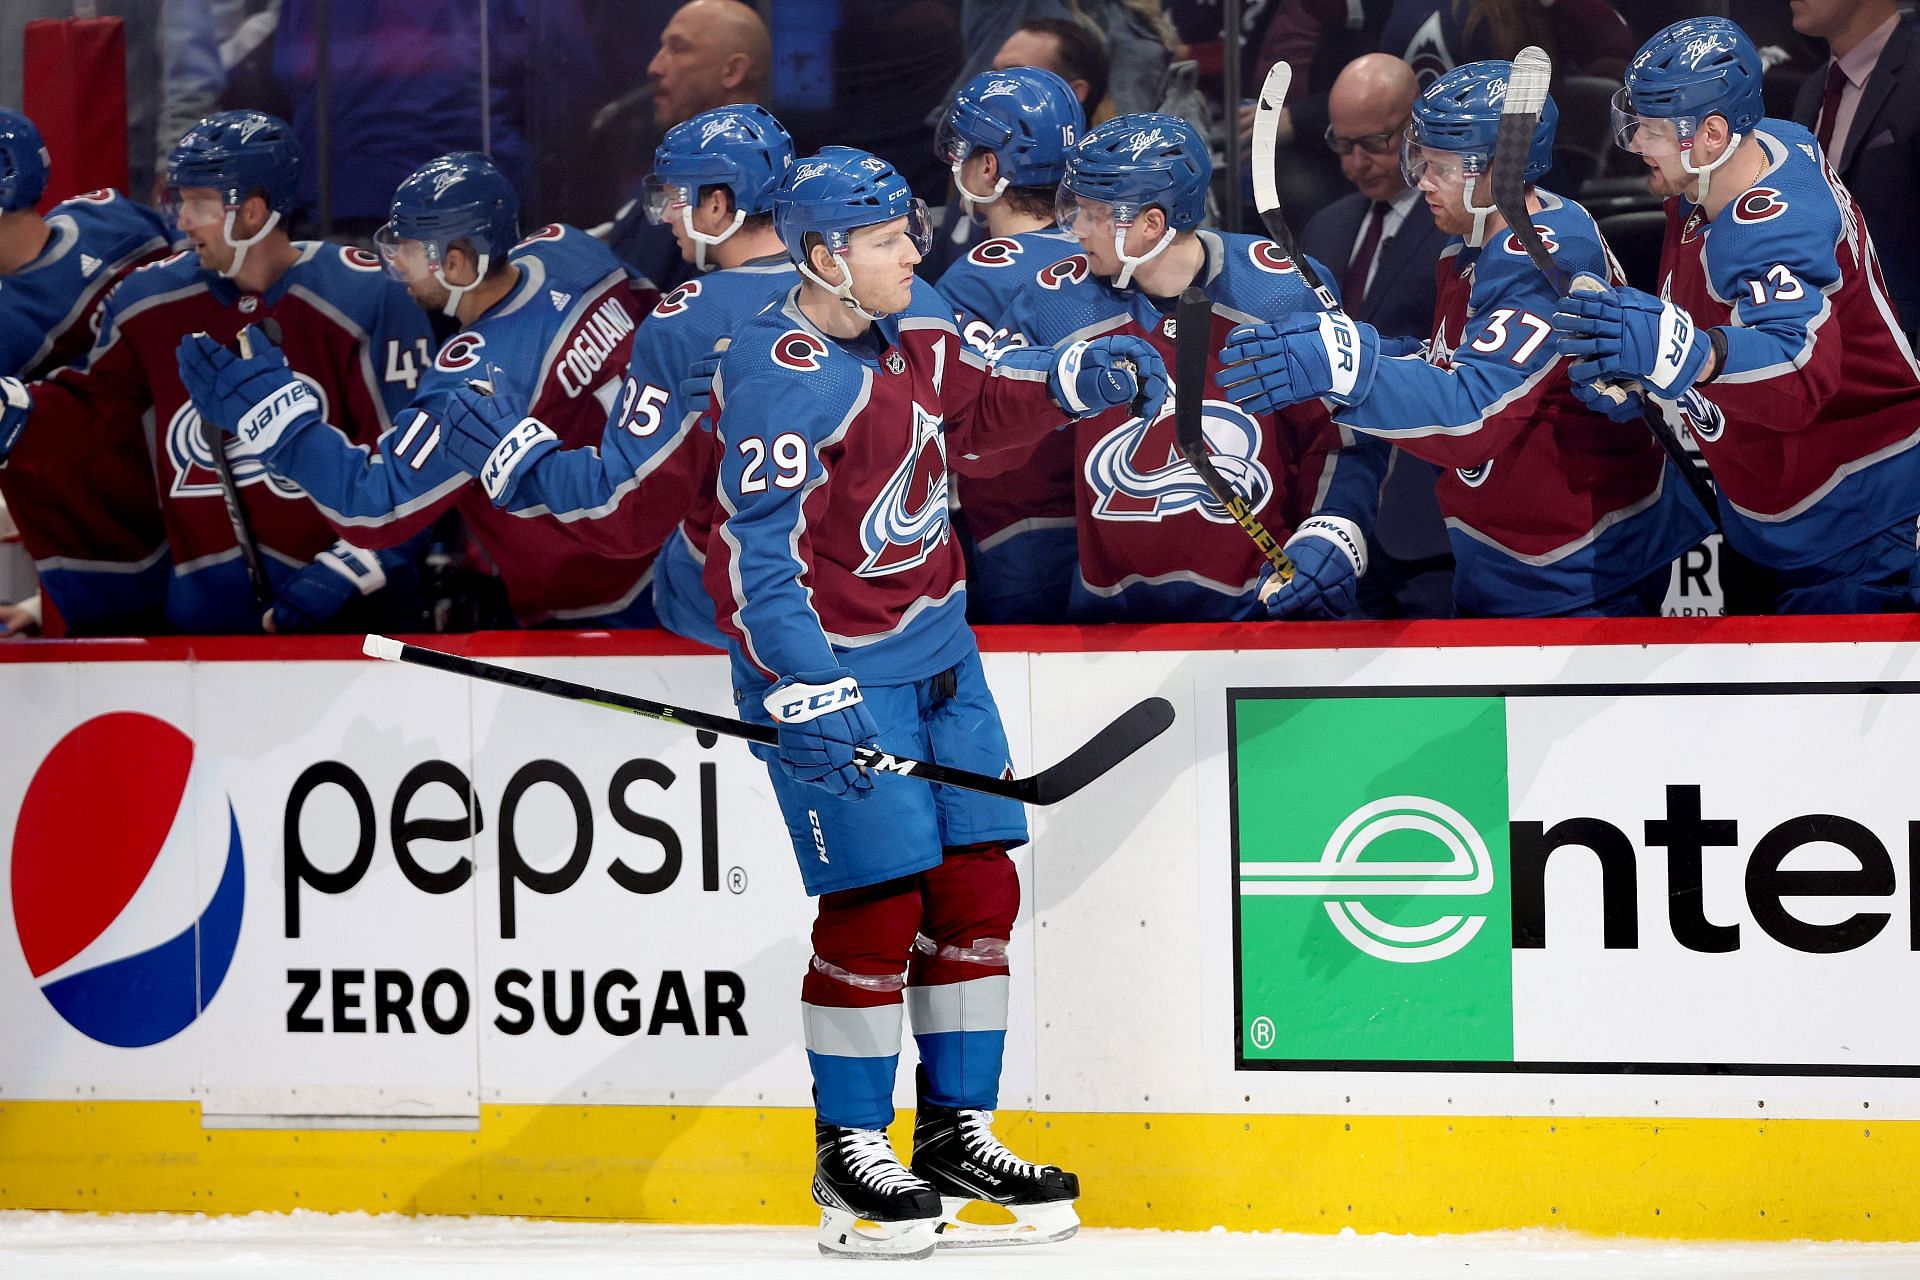 Nathan Mackinnon leads his team with four goals in this series.